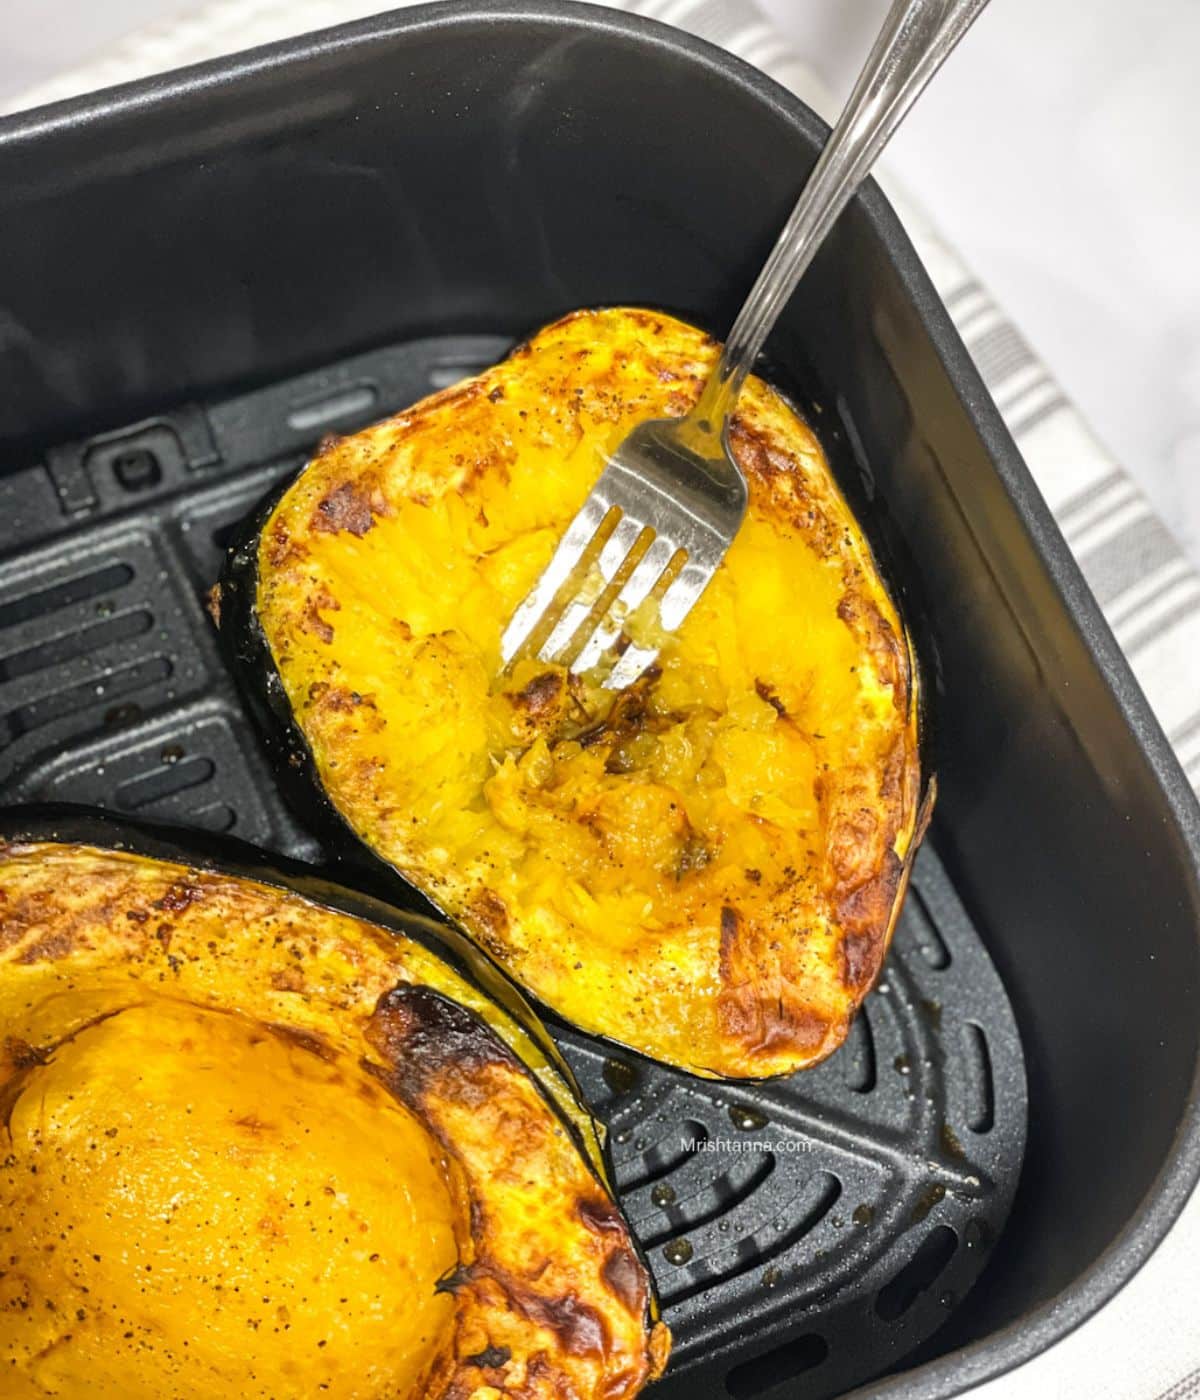 Air fryer basket is with roasted acorn squash.